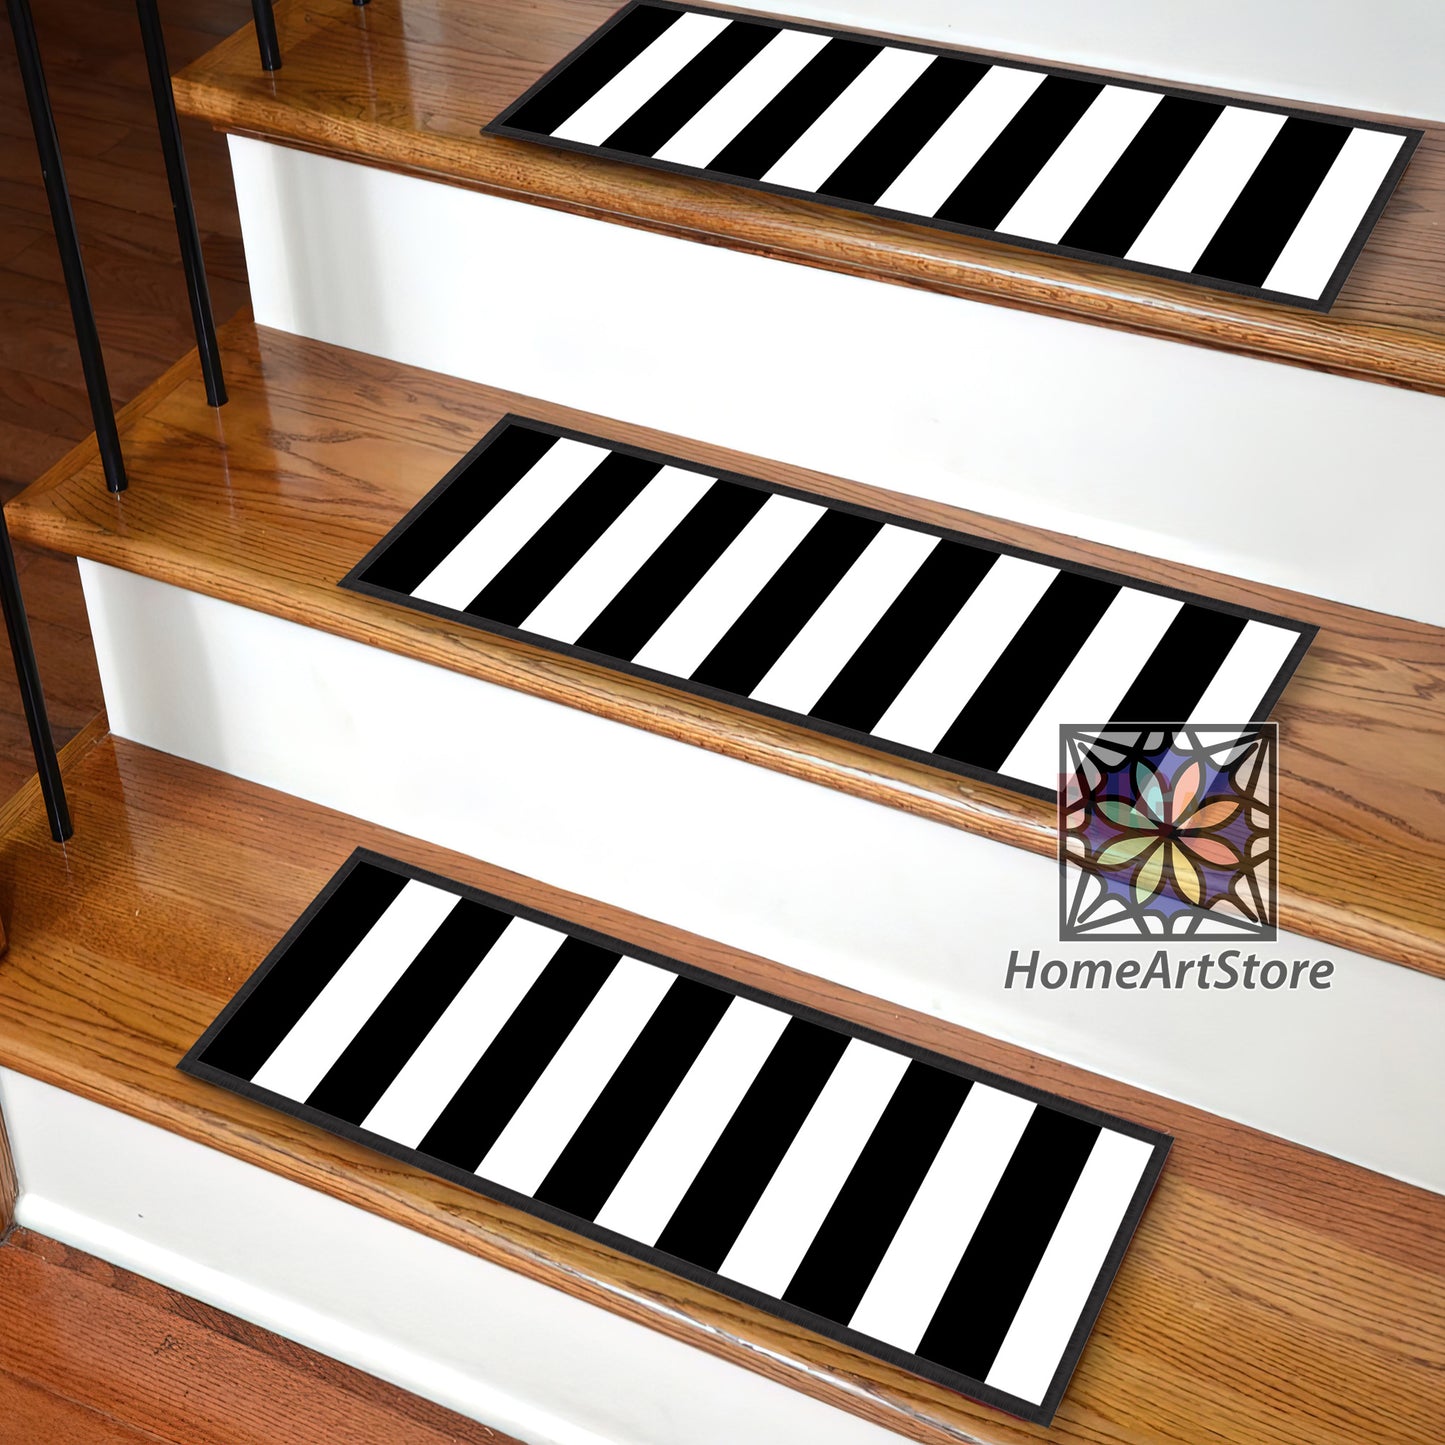 Striped Stair Step Rugs, Black and White Stair Mats, Modern Decorative Stair Carpet, Entryway Décor